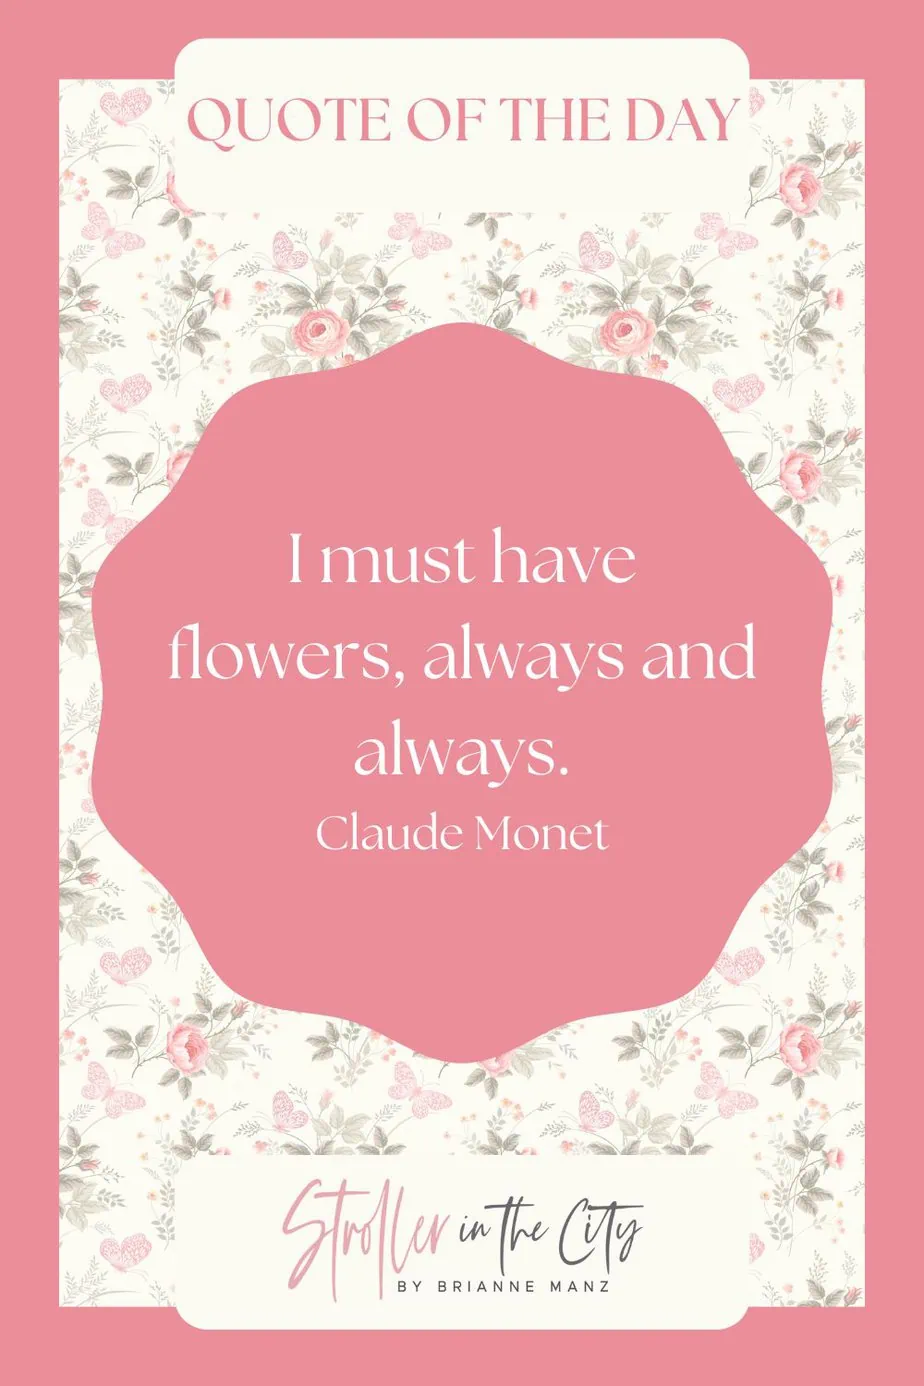 spring quote